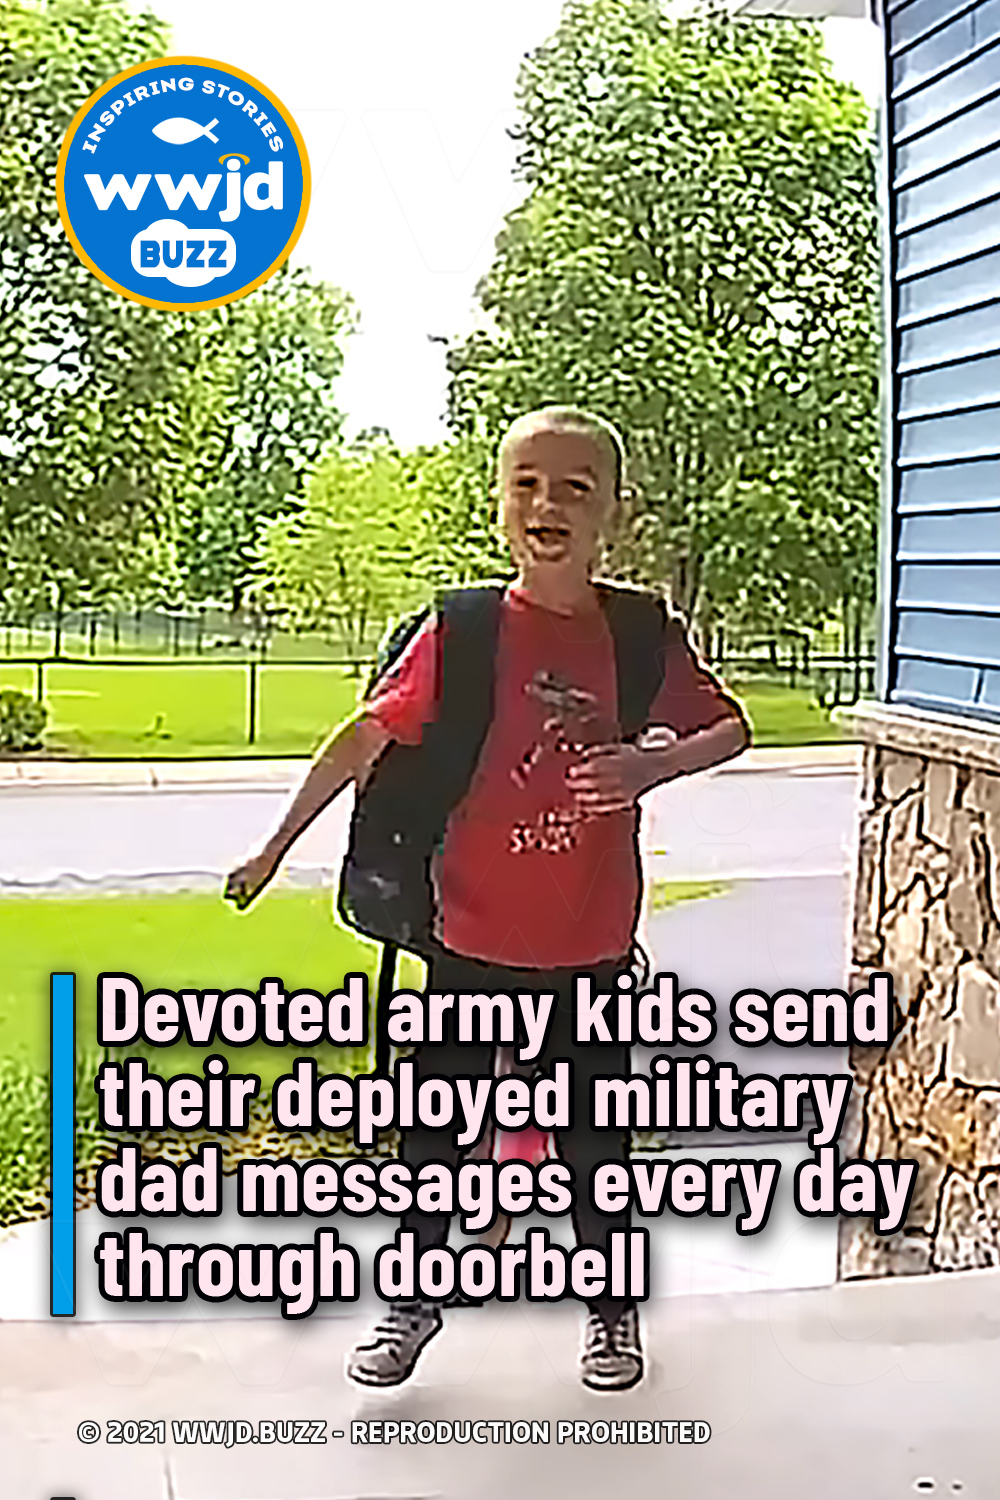 Devoted army kids send their deployed military dad messages every day through doorbell